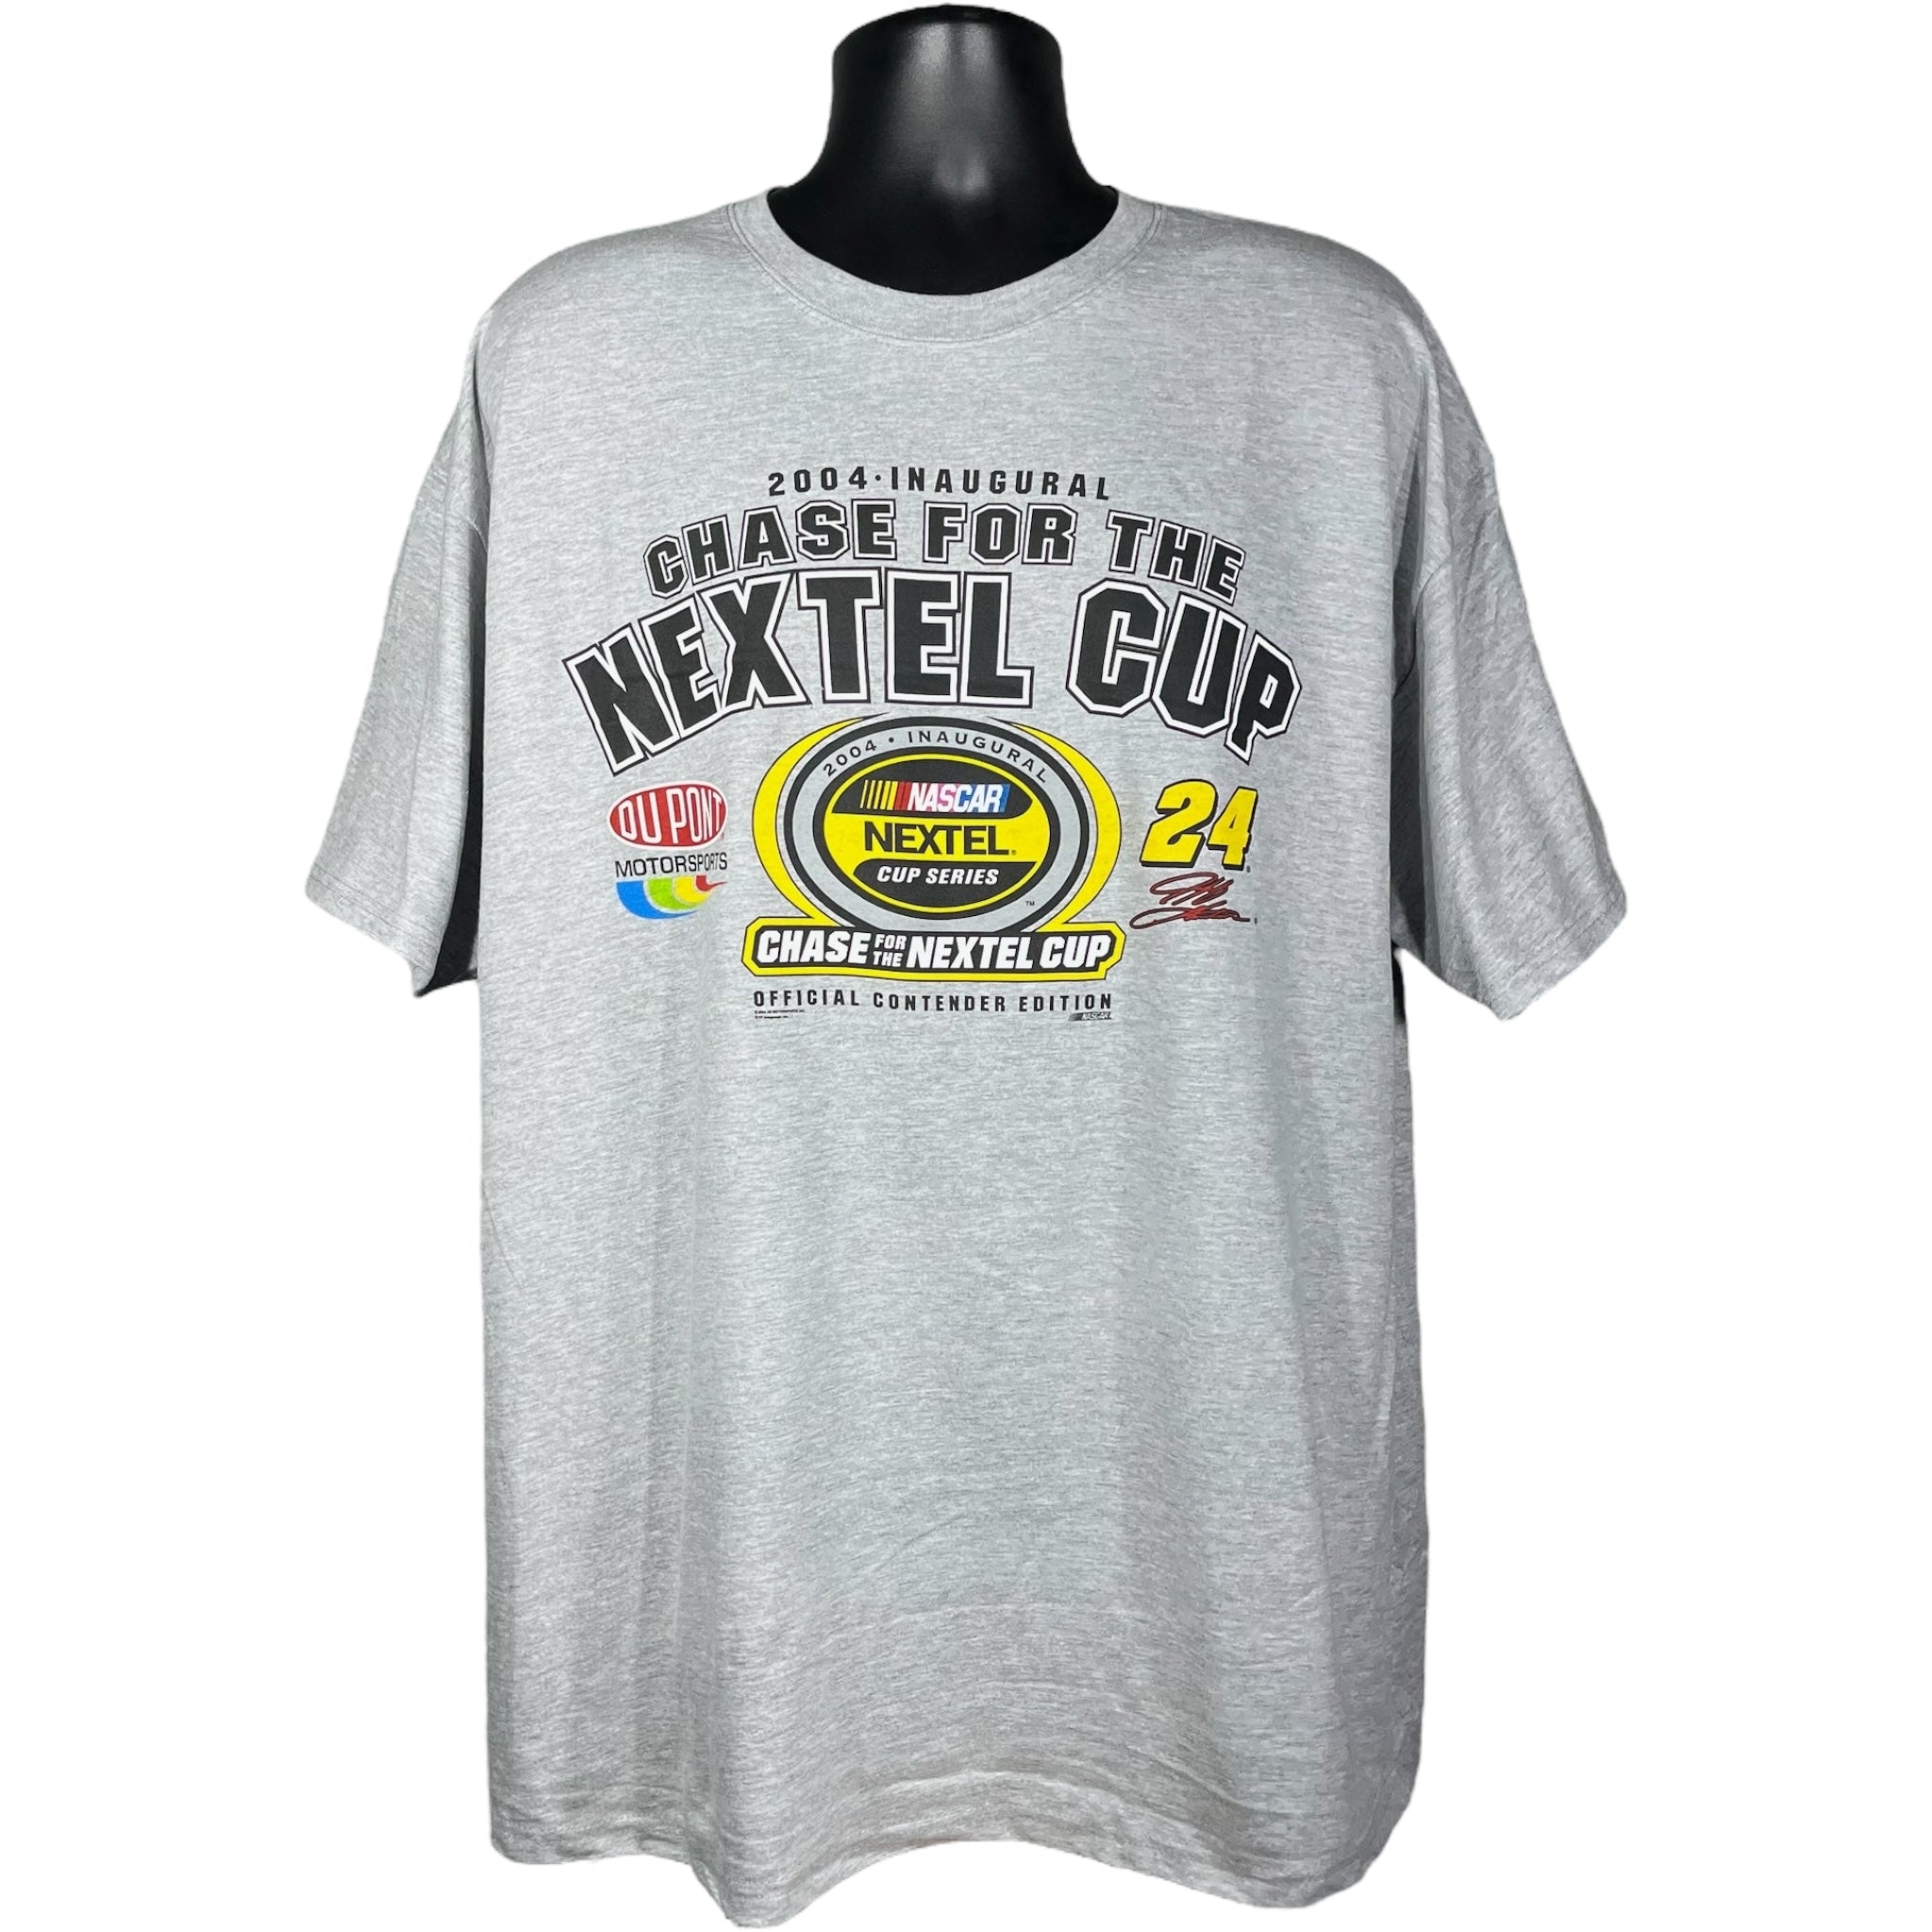 Vintage "Chase For The Nextel Cup" NASCAR Tee